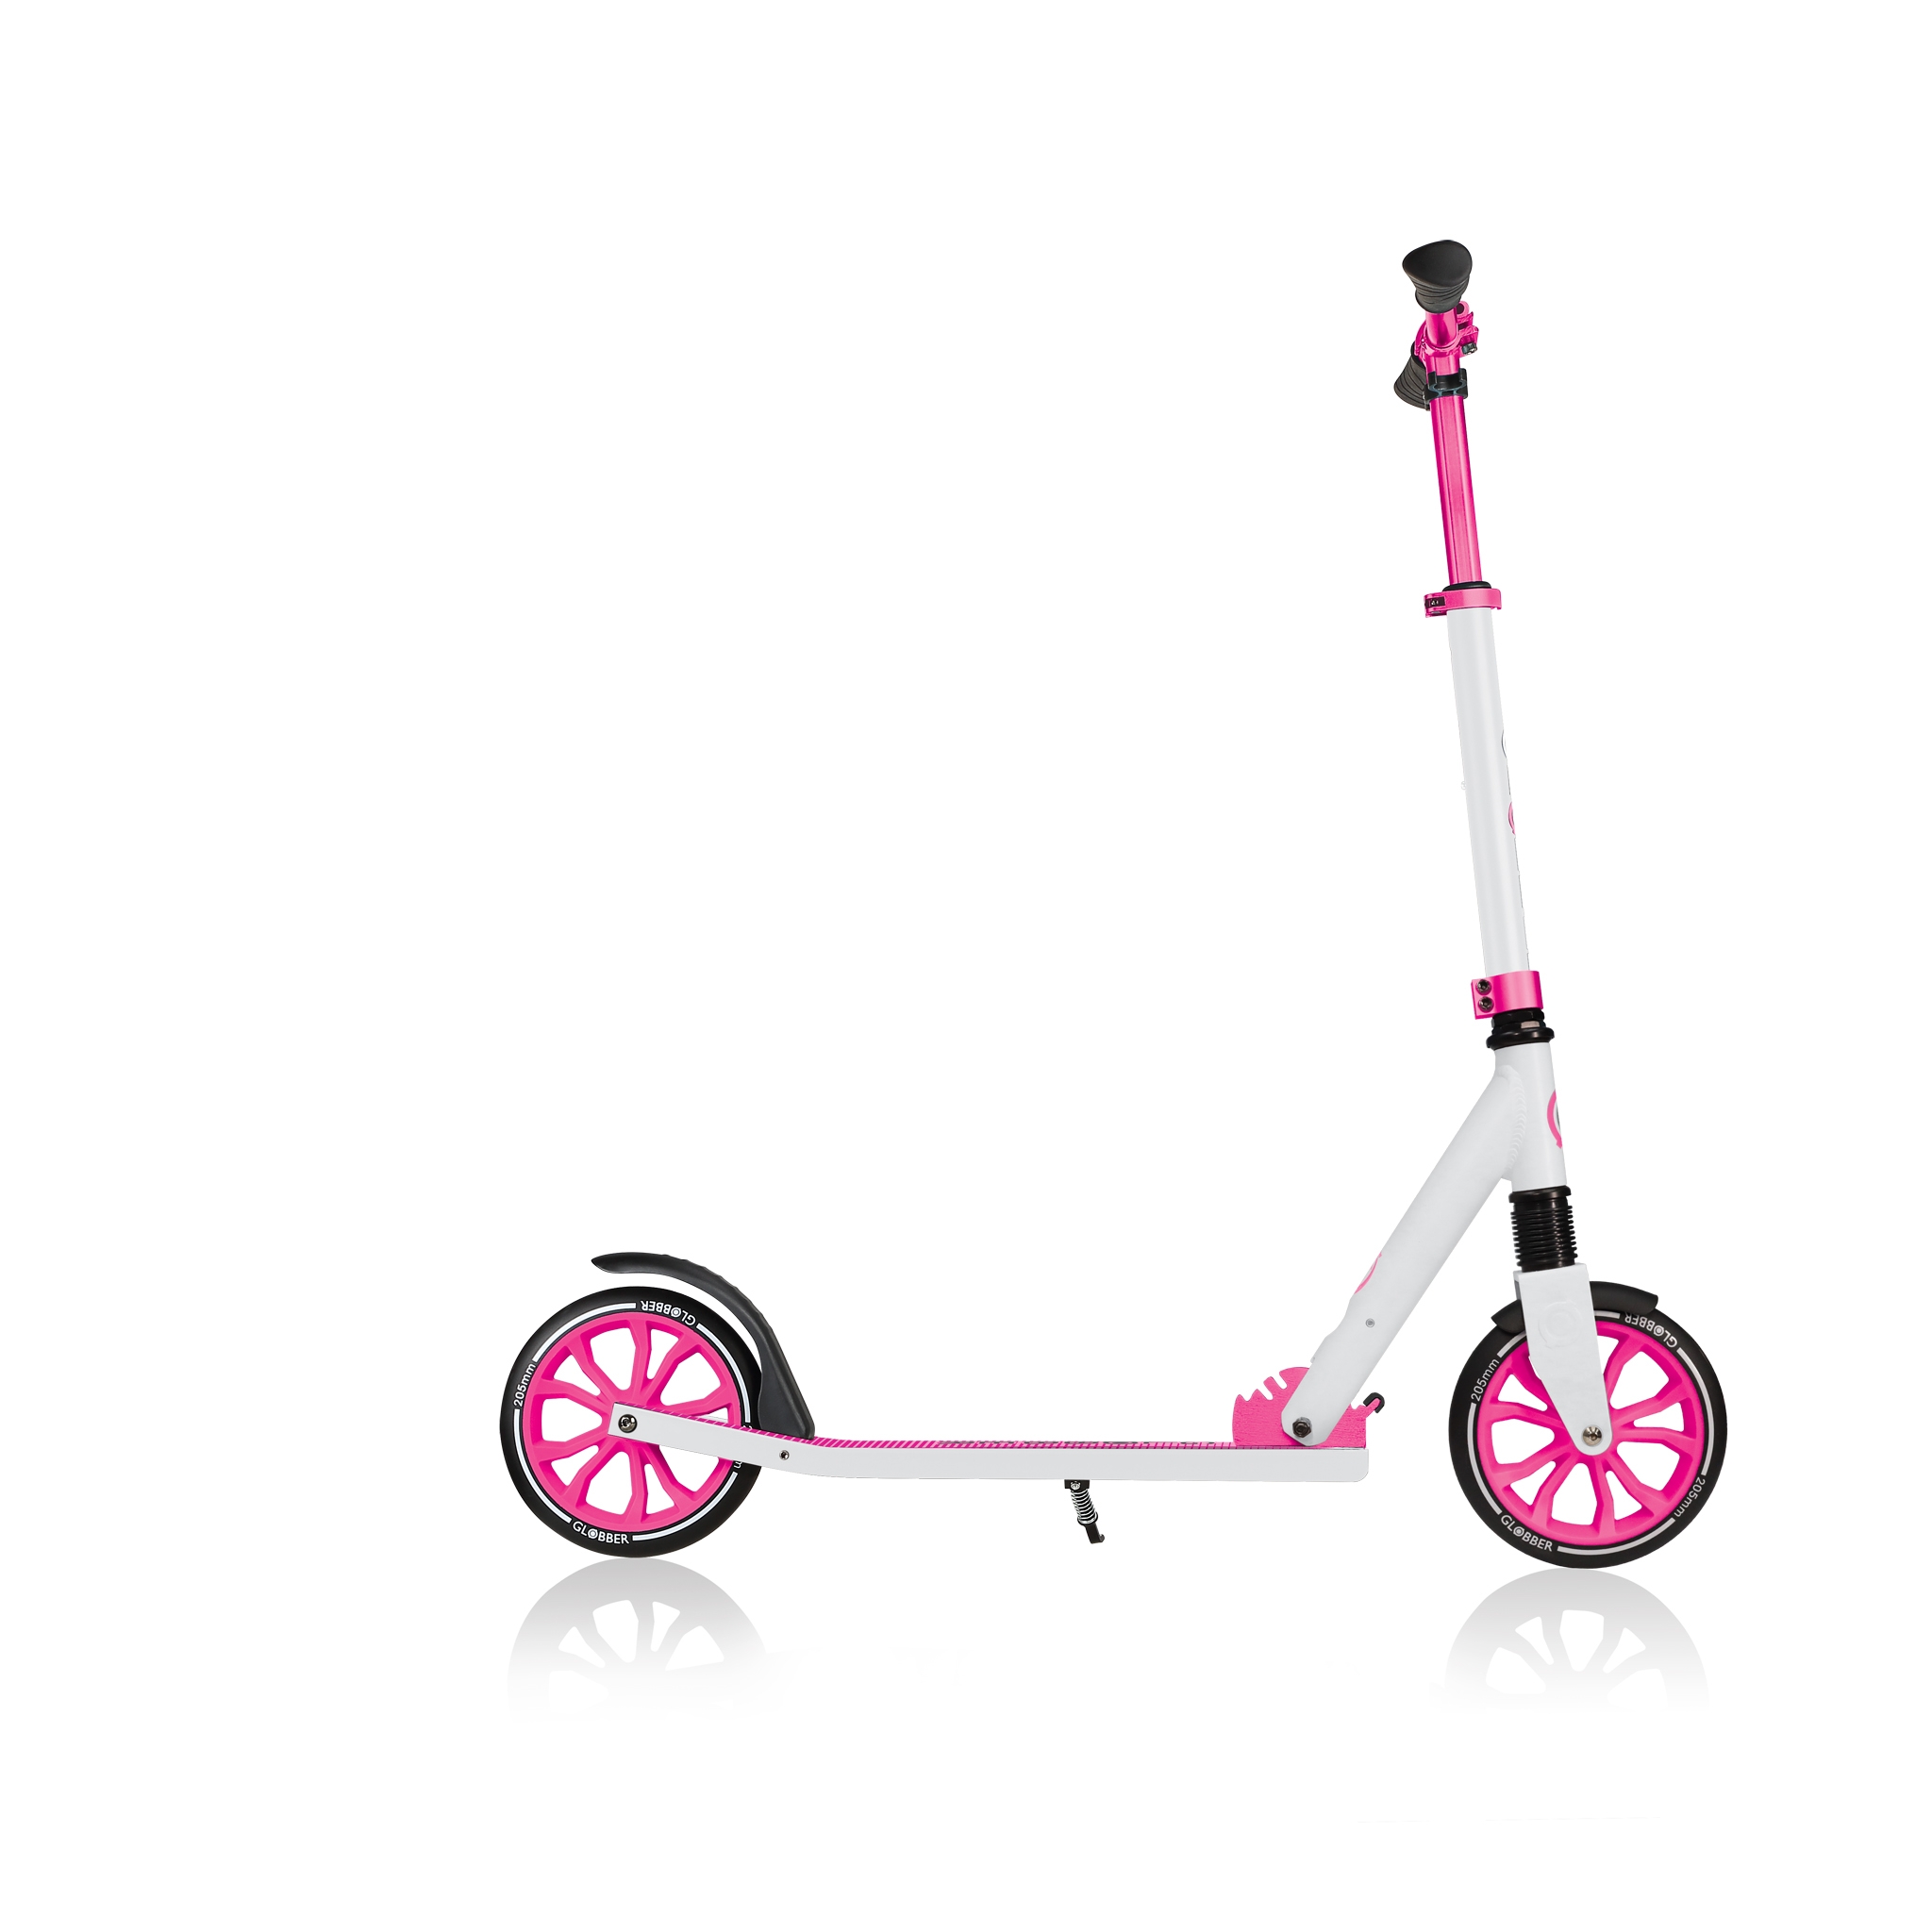 Globber-NL-205-collapsible-2-wheel-scooter-for-kids-with-big-wheels-205mm 3